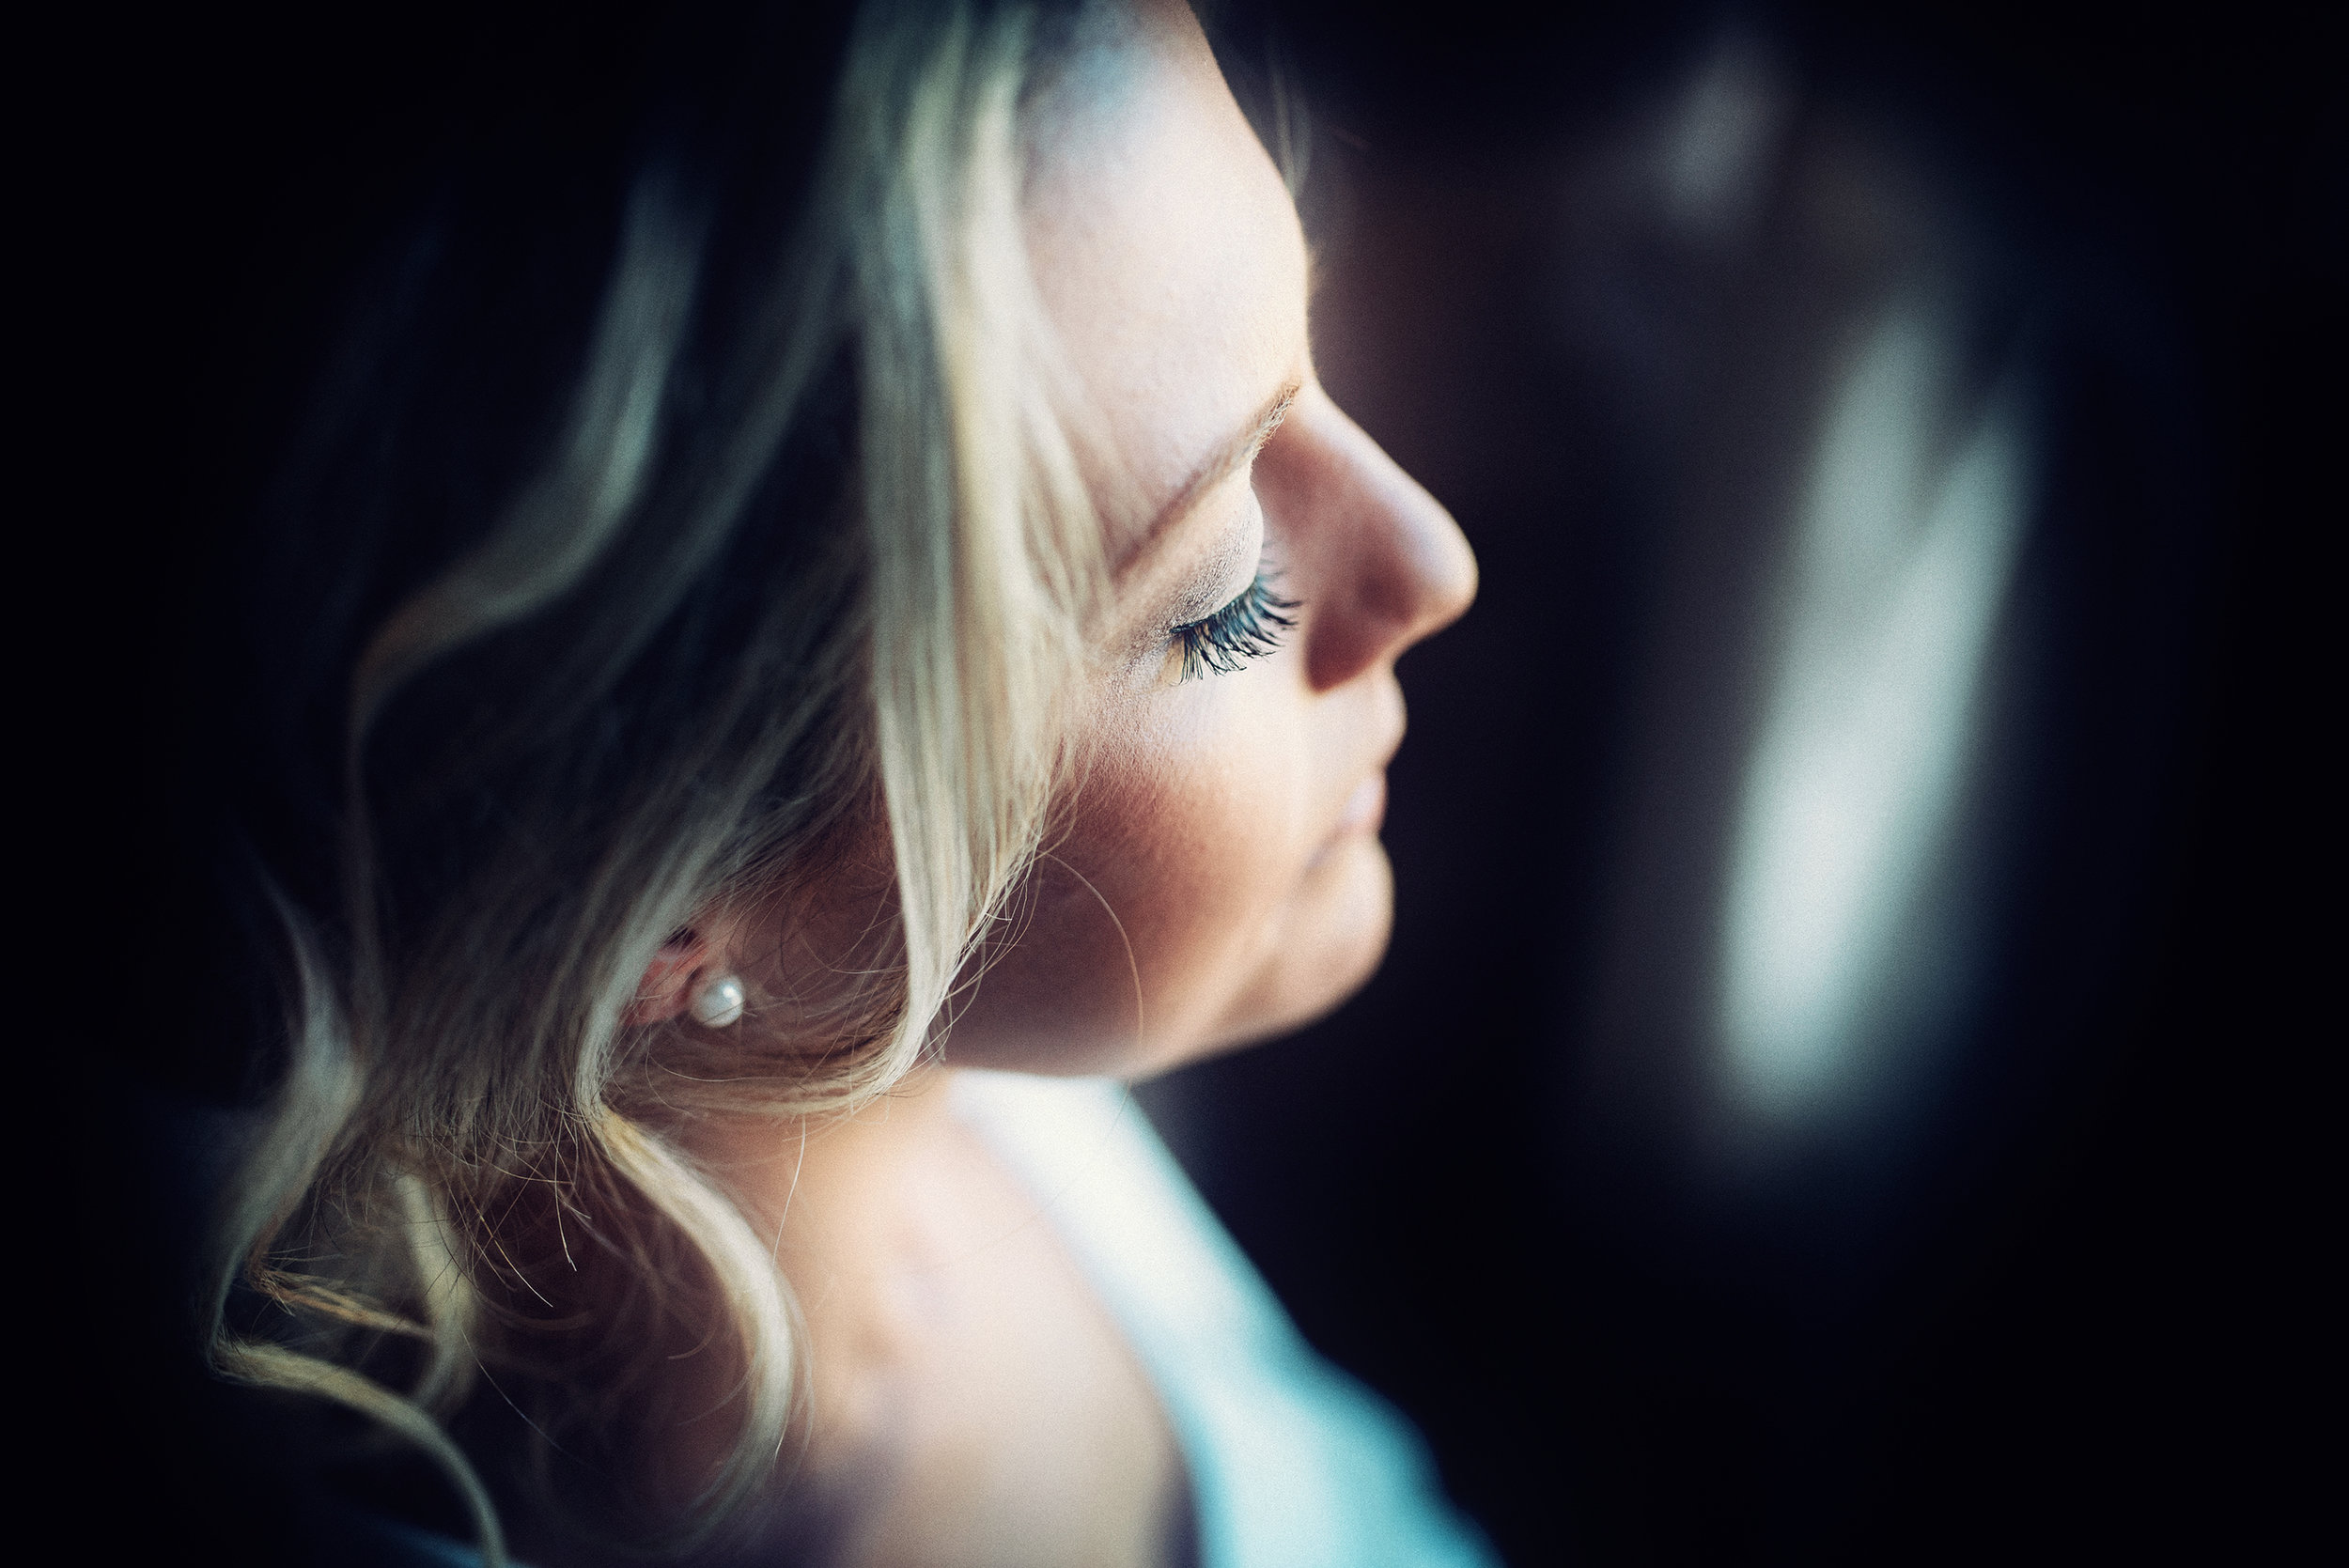 A bridesmaid in subdued light during bridal preparations